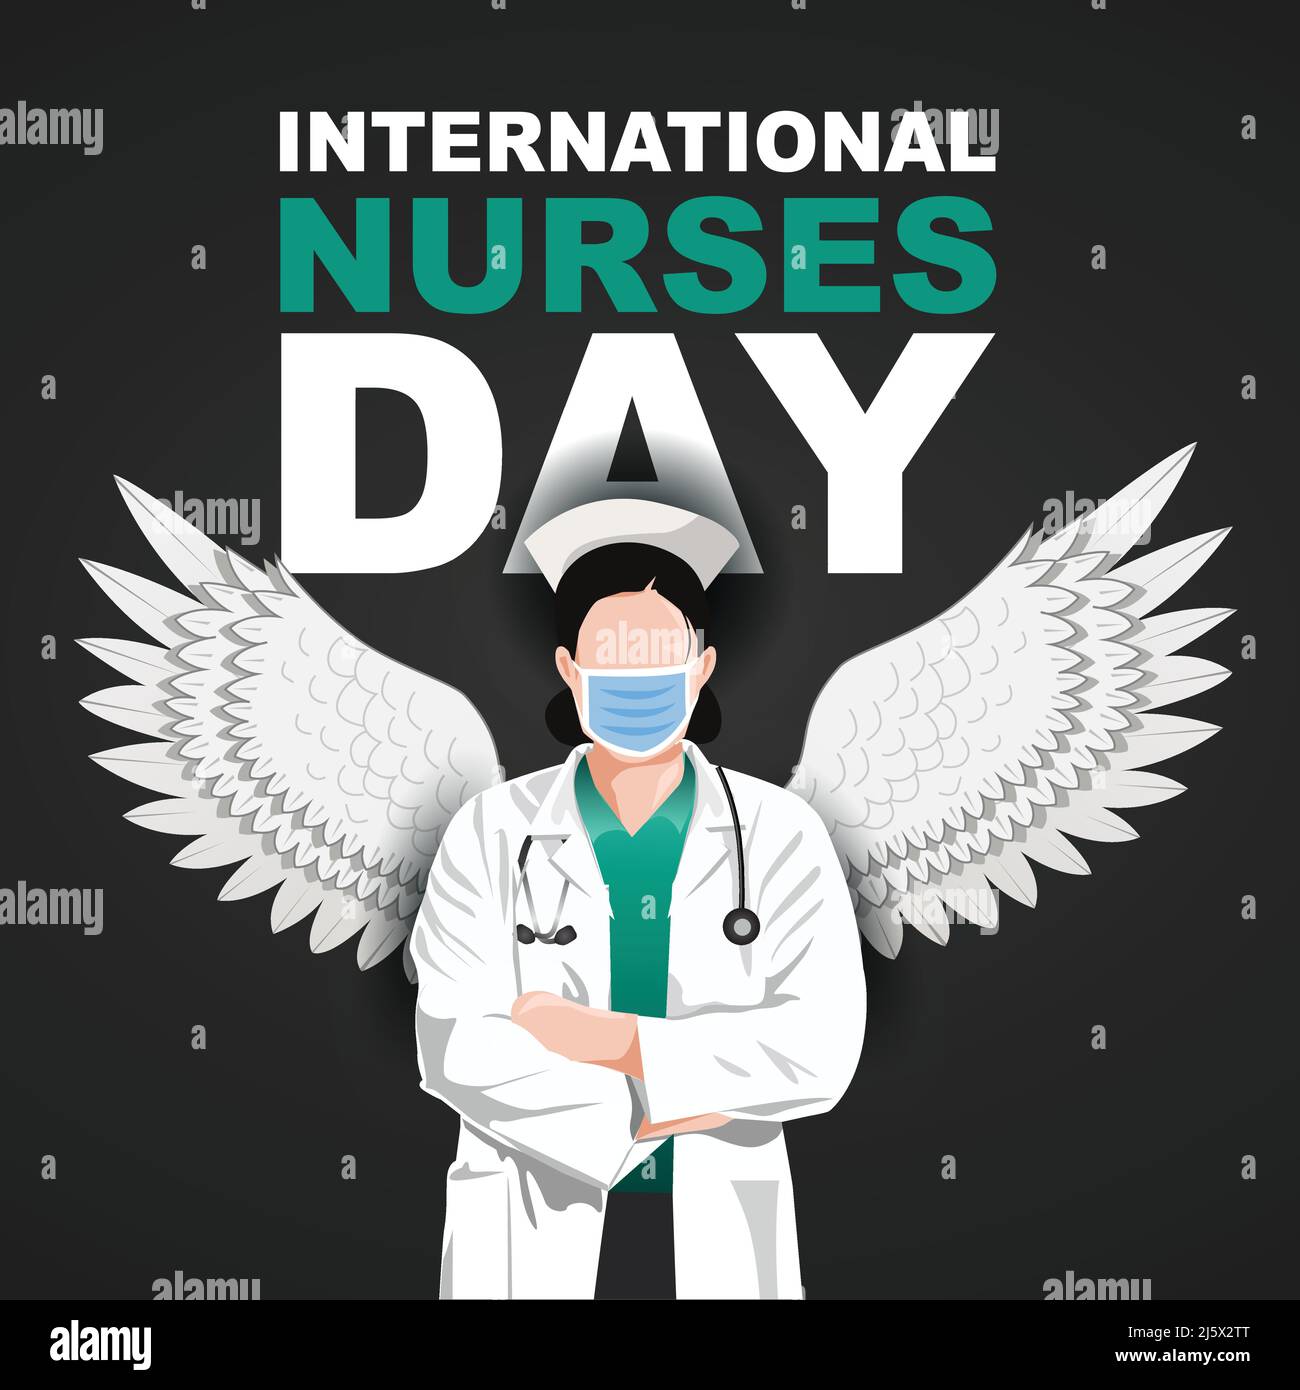 12 May. happy International Nurse Day background. half size of nurse`s uniform with wings and stethoscope. Vector illustration design Stock Vector